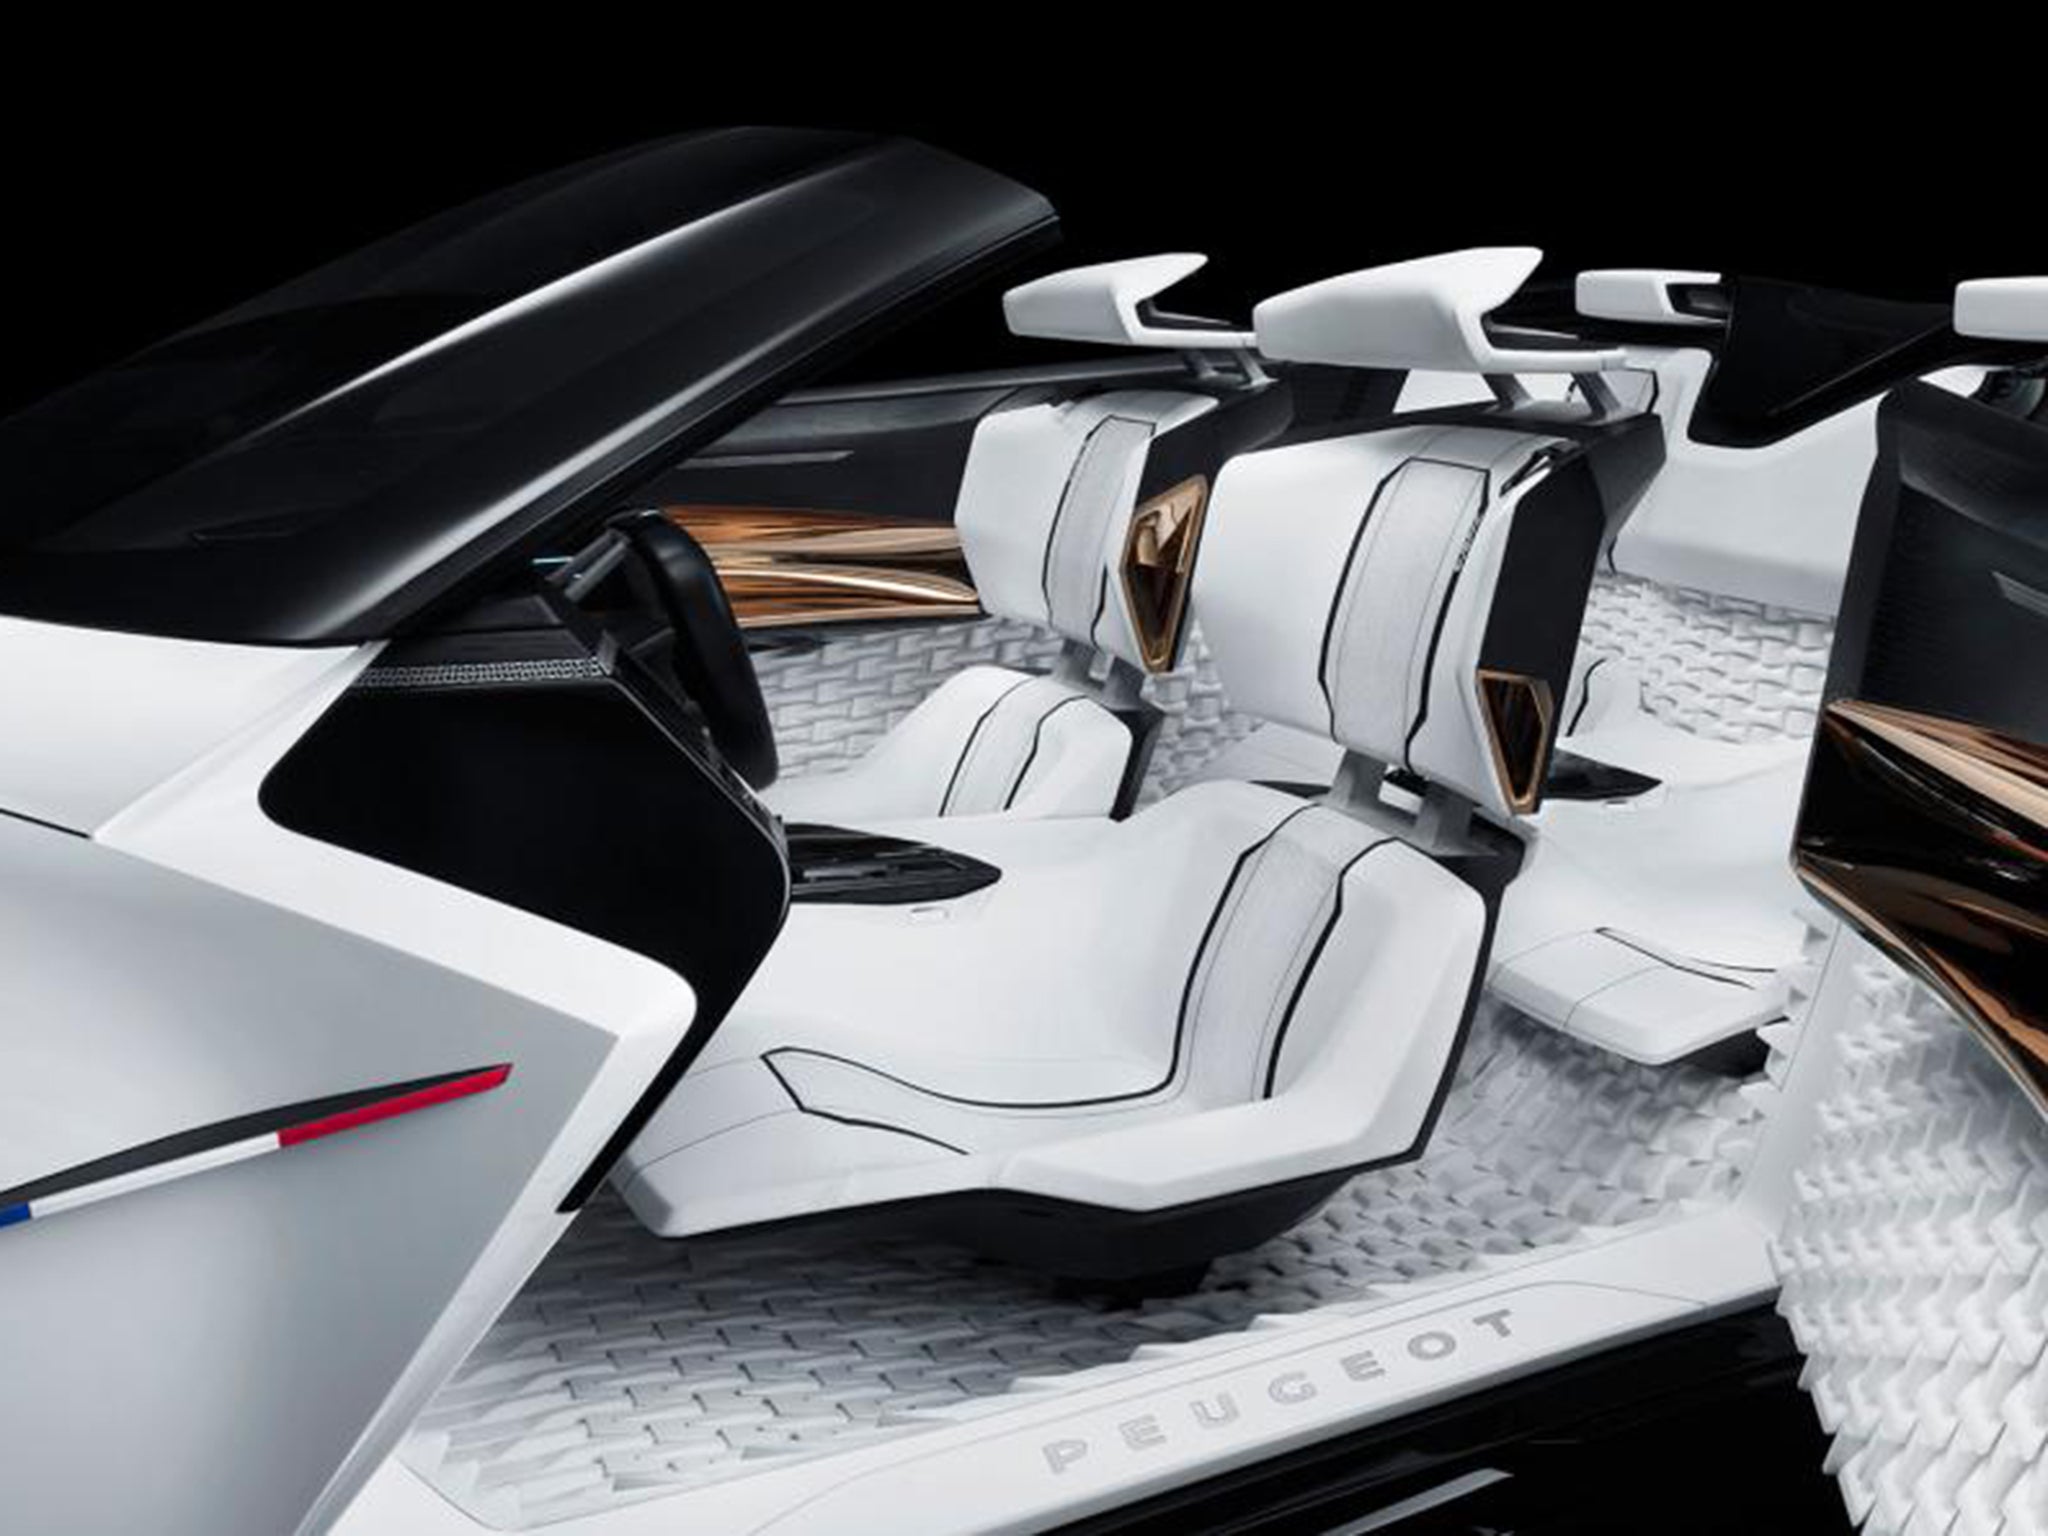 80% of its interior is formed from 3D-printed components.